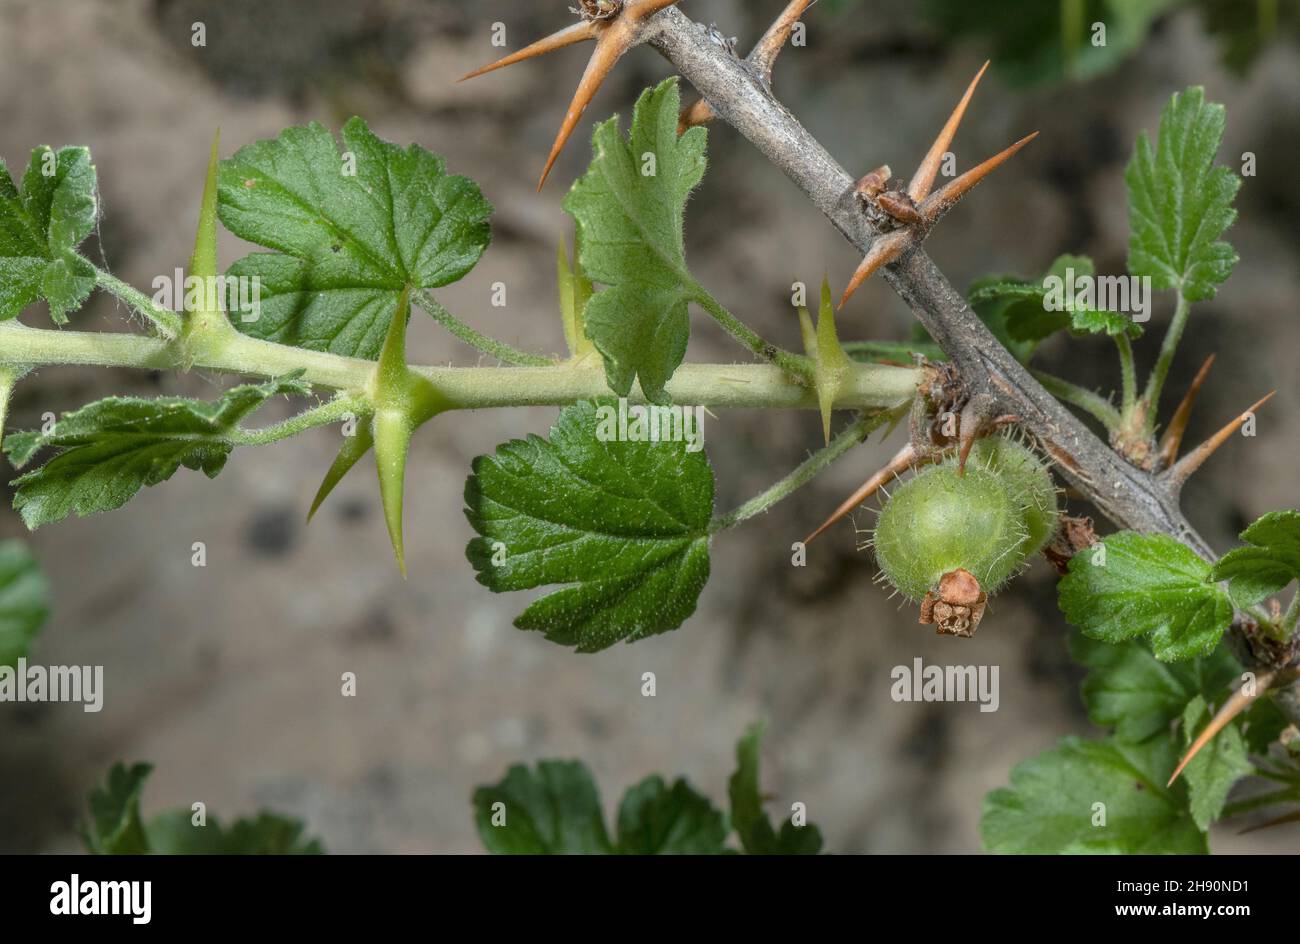 Wild Gooseberry, Ribes uva-crispa, showing developing fruit, and spines. Stock Photo